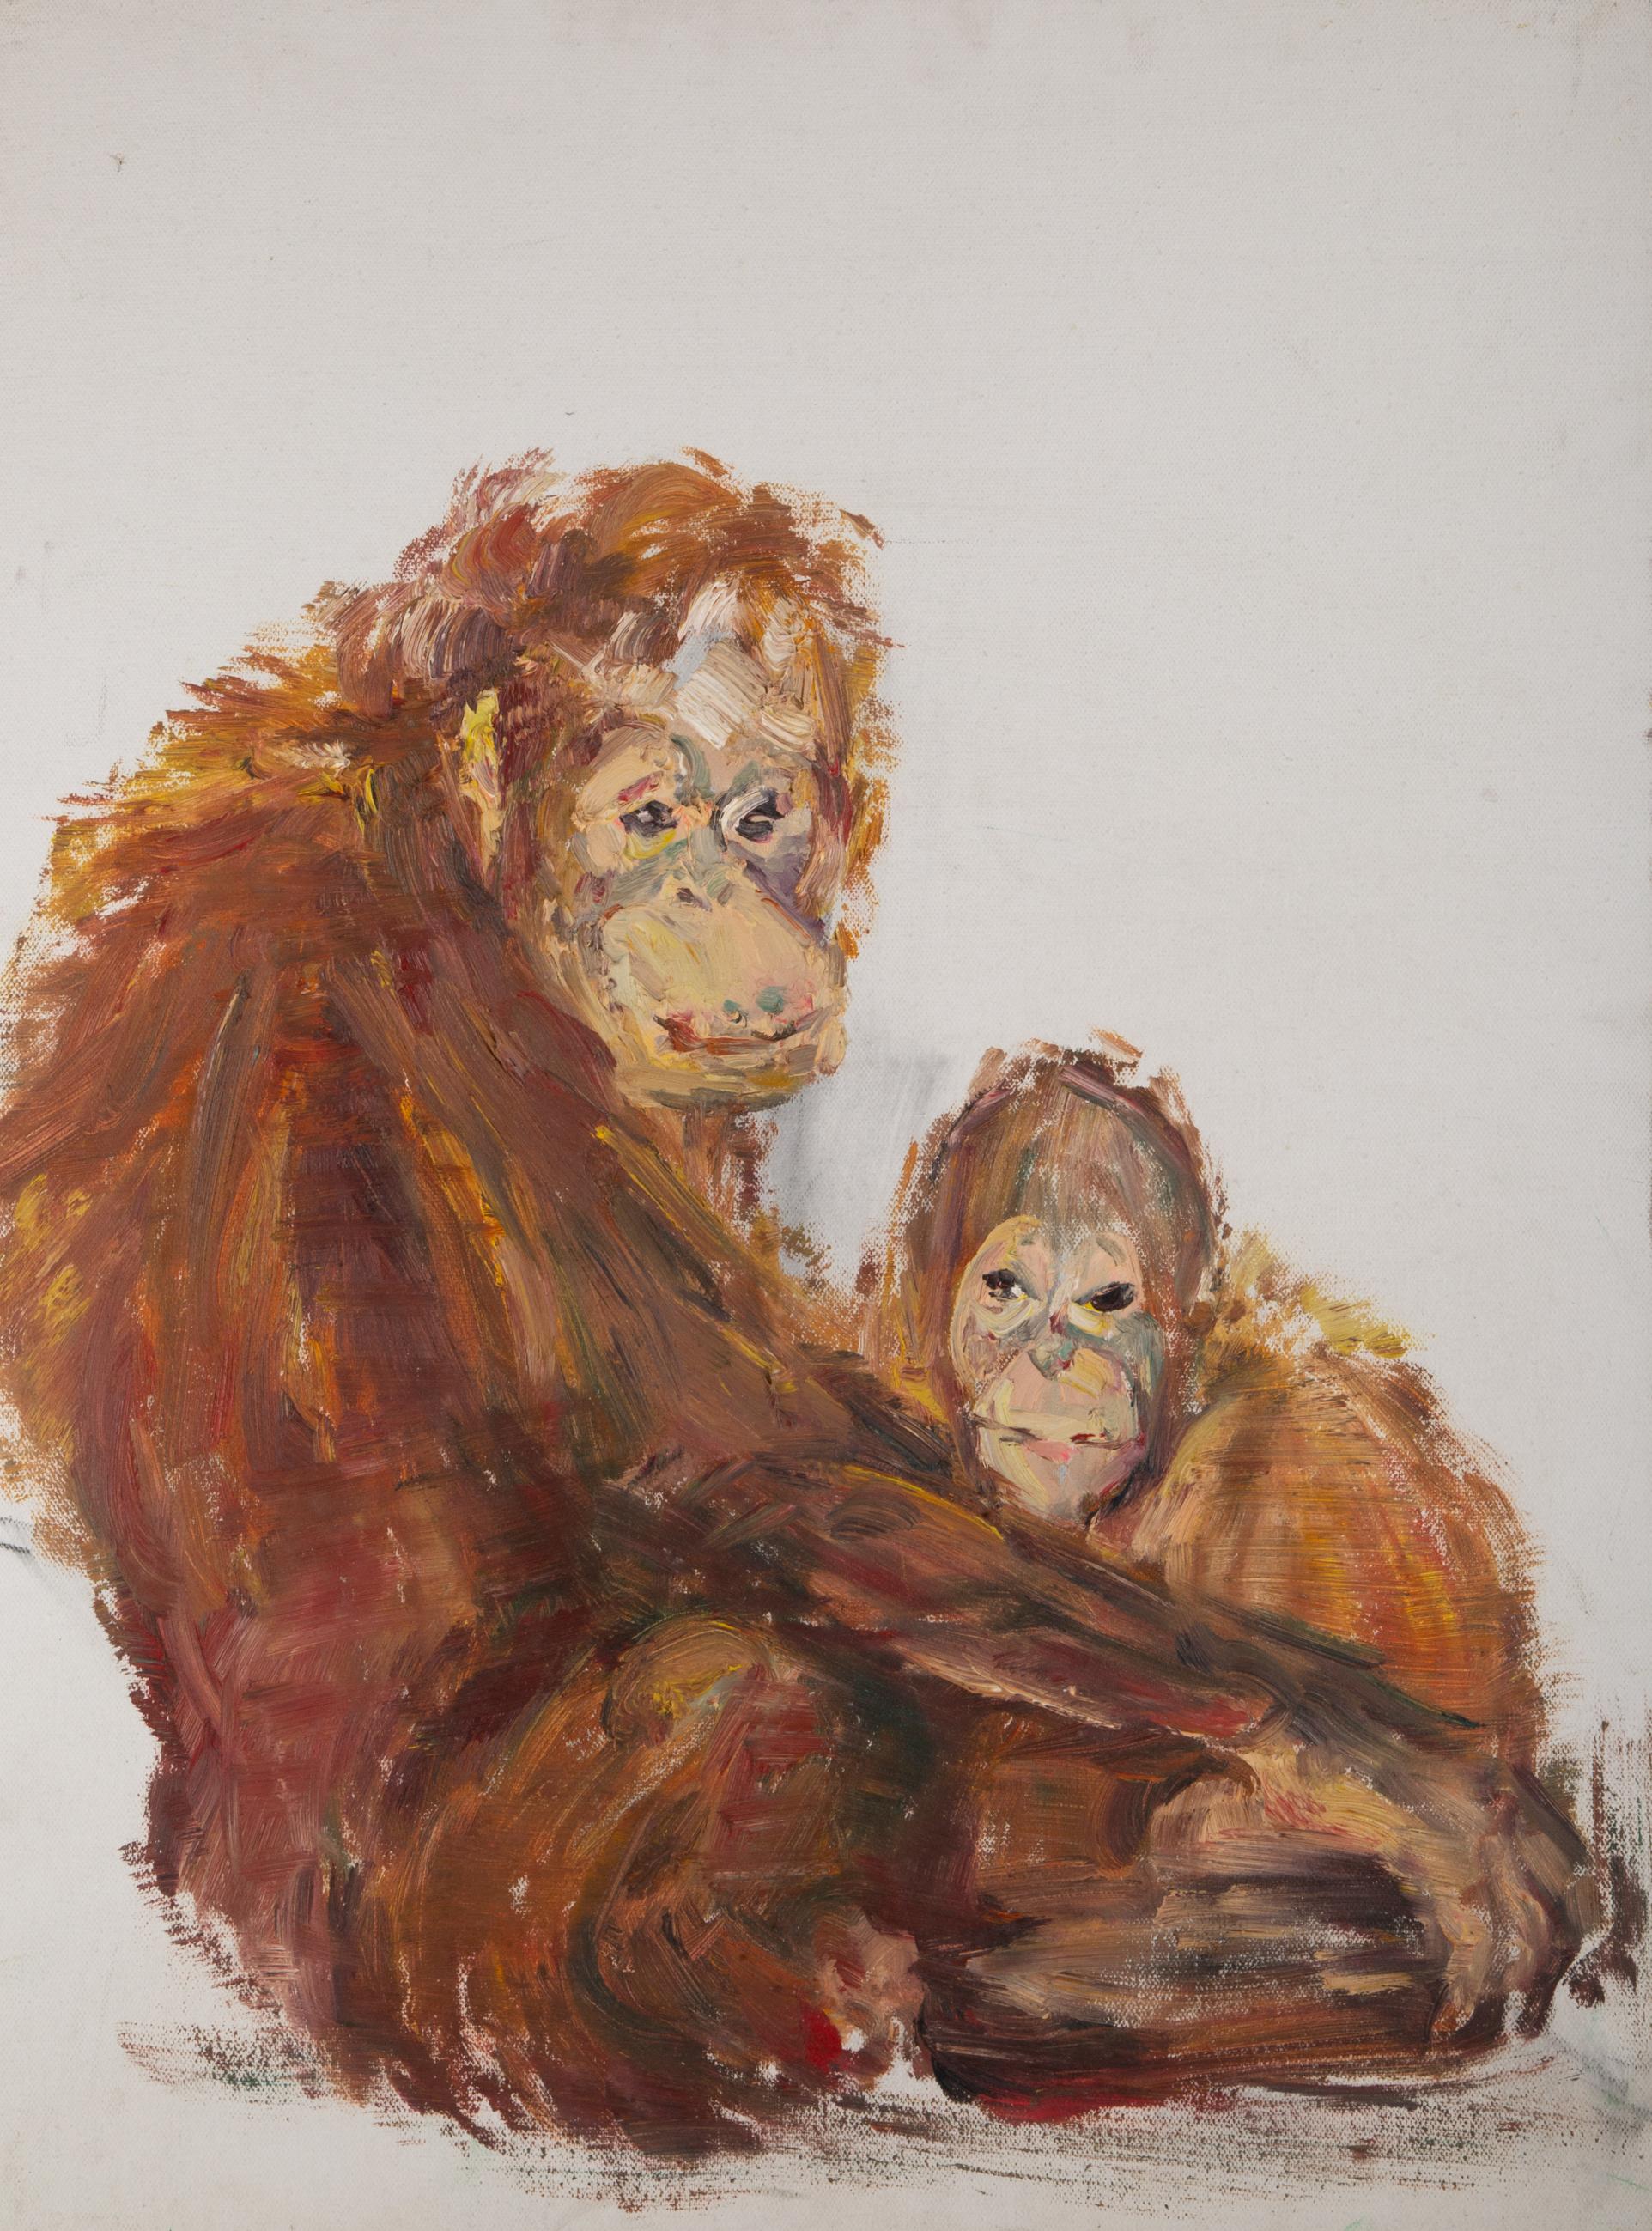 Title: Mother and Son
Medium: Oil on canvas
Size: 31 x 23.5 inches
Frame: Framing options available!
Condition: The painting appears to be in excellent condition.

Year: 2000 Circa
Artist: HuaQiao Xi
Signature: Unsigned
Signature Location: